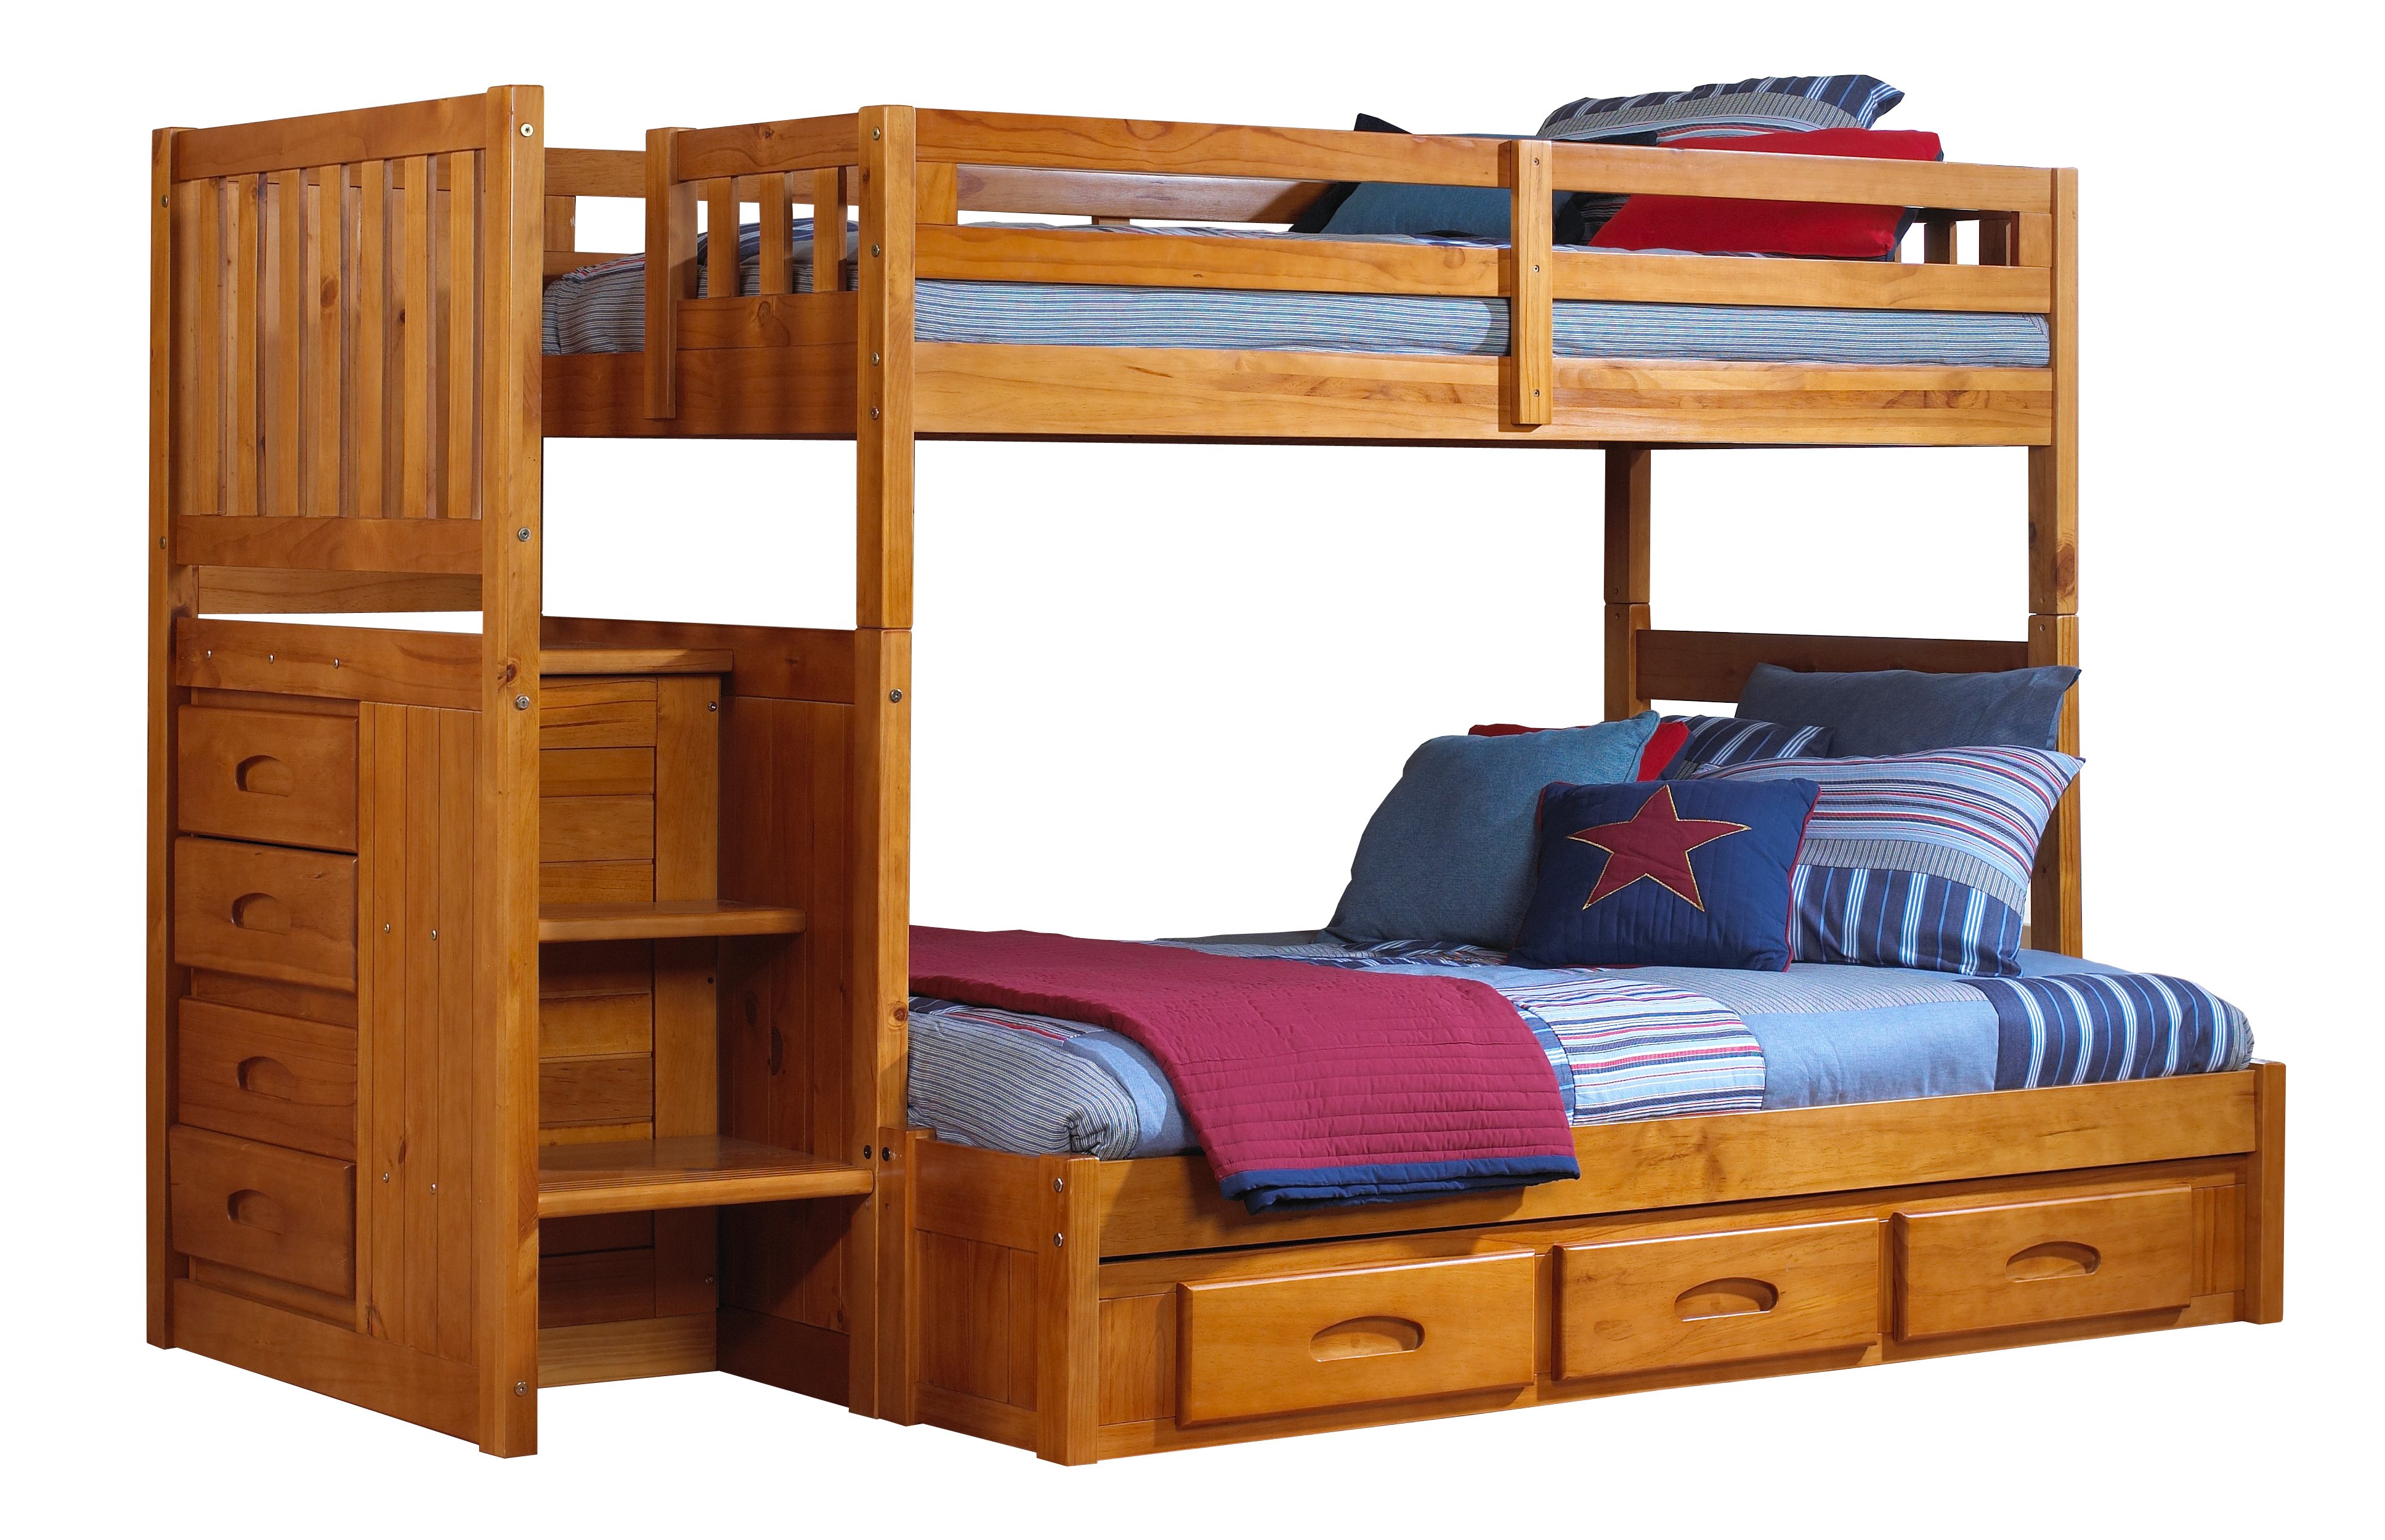 Honey Staircase Bunk Bed, Wood Twin Bunk Beds